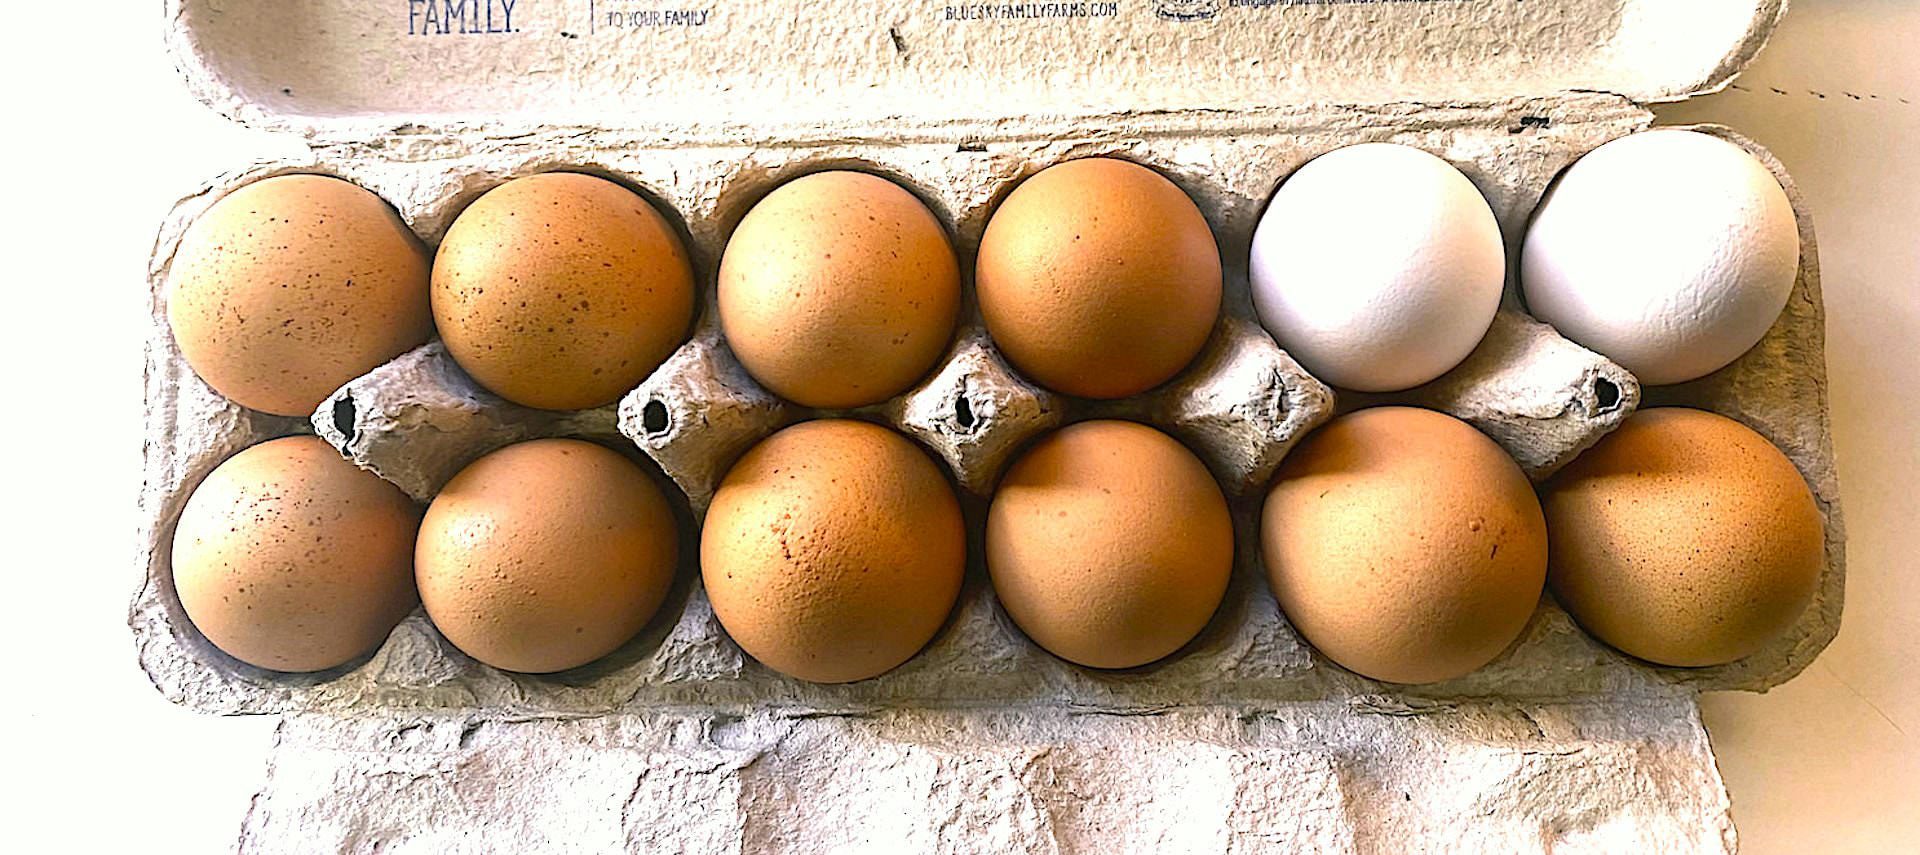 Close up view of brown and white eggs in a tan egg carton